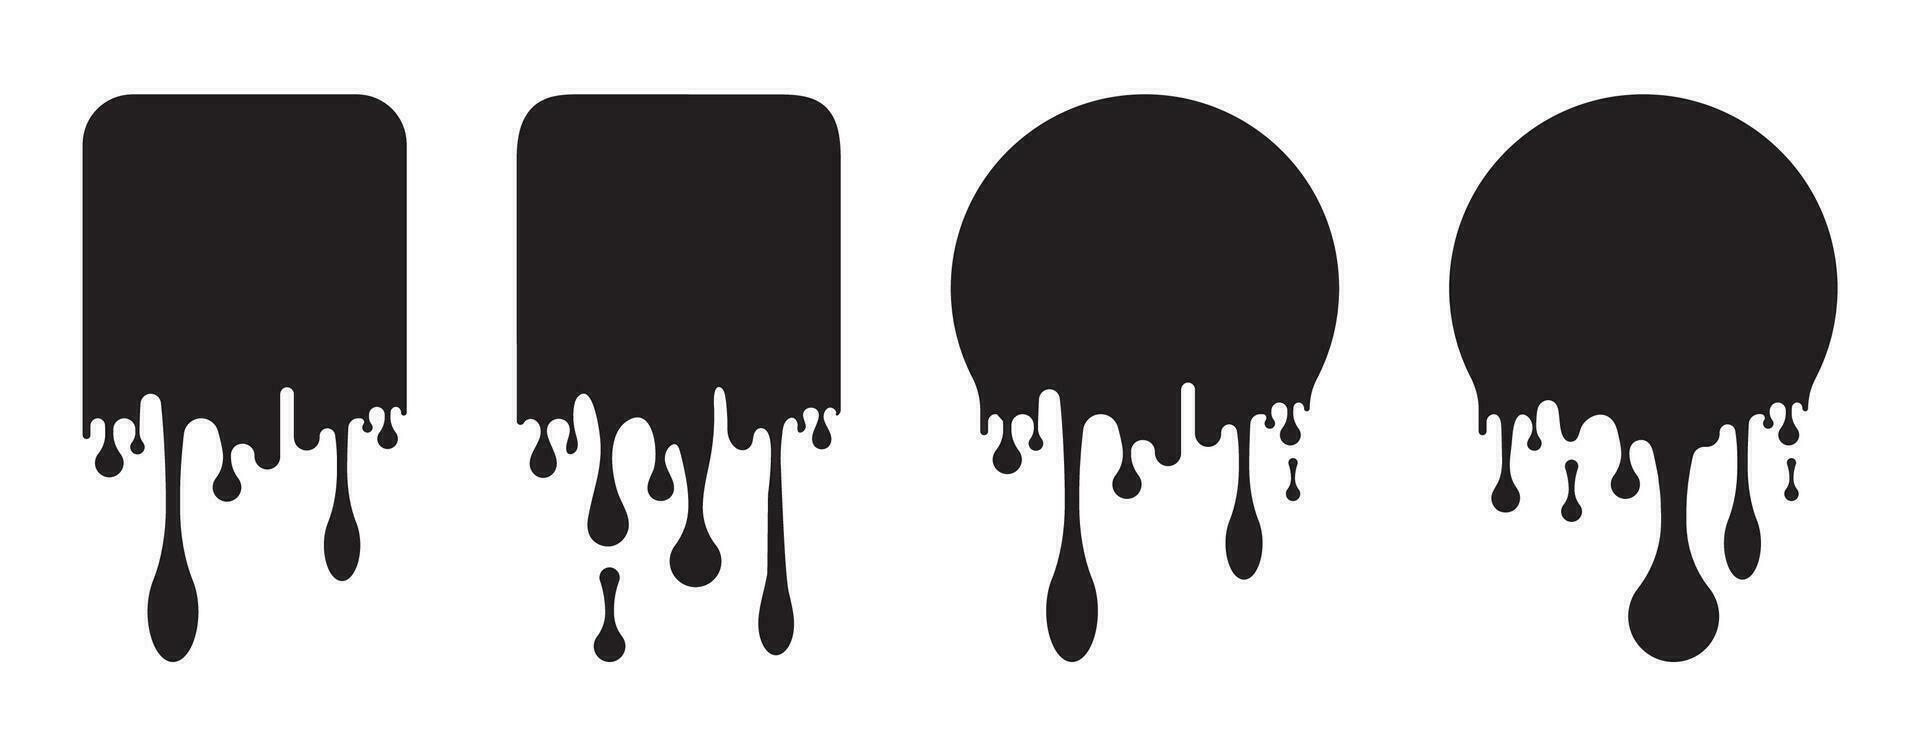 paint drip or Dripping paint square and circle sticker labels vector